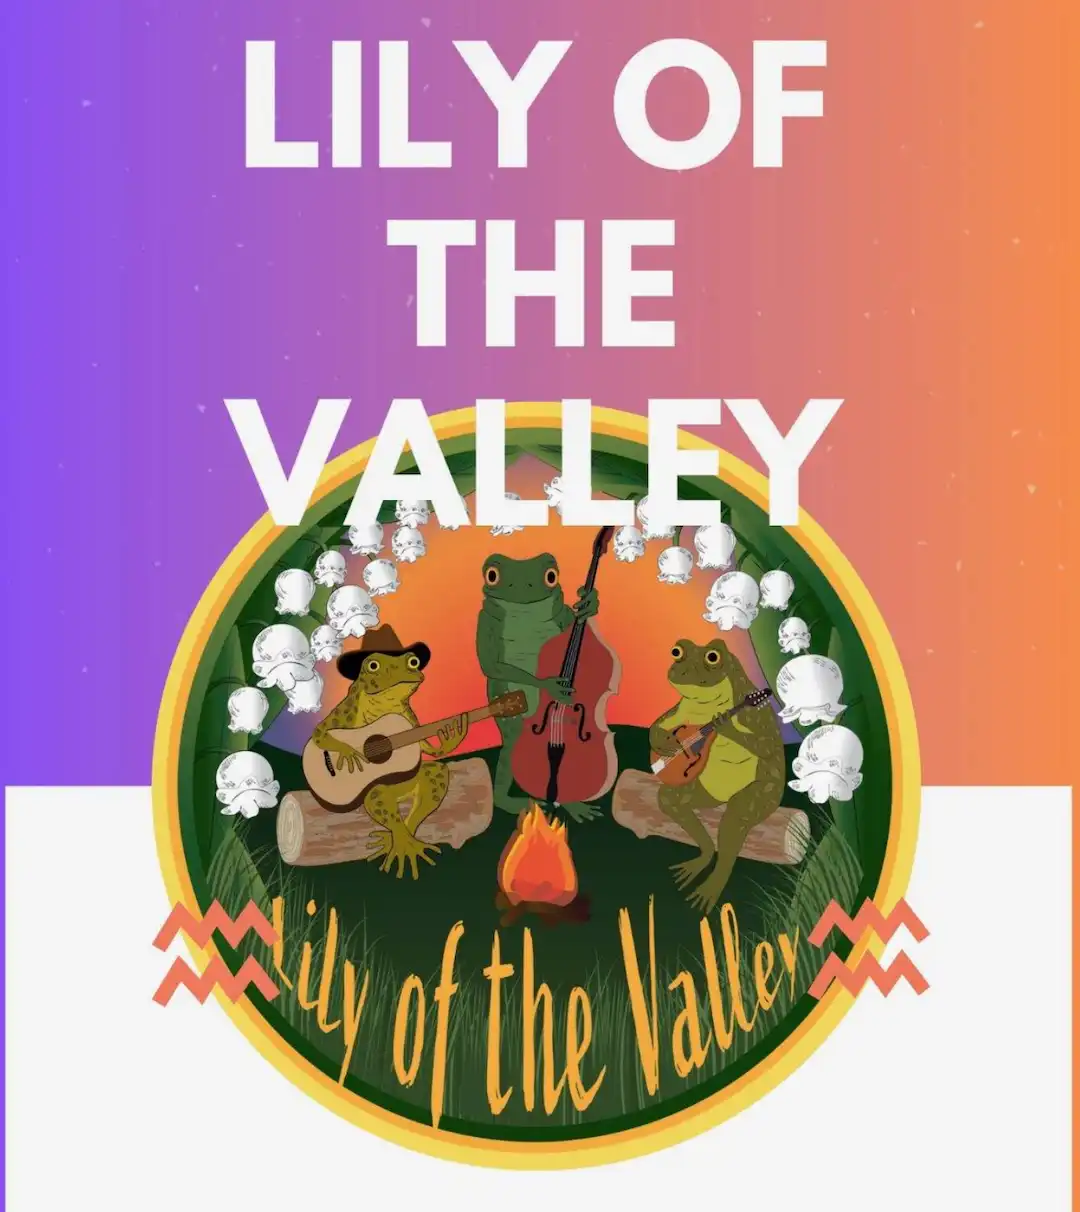 Promotional flier for Lily of the Valley